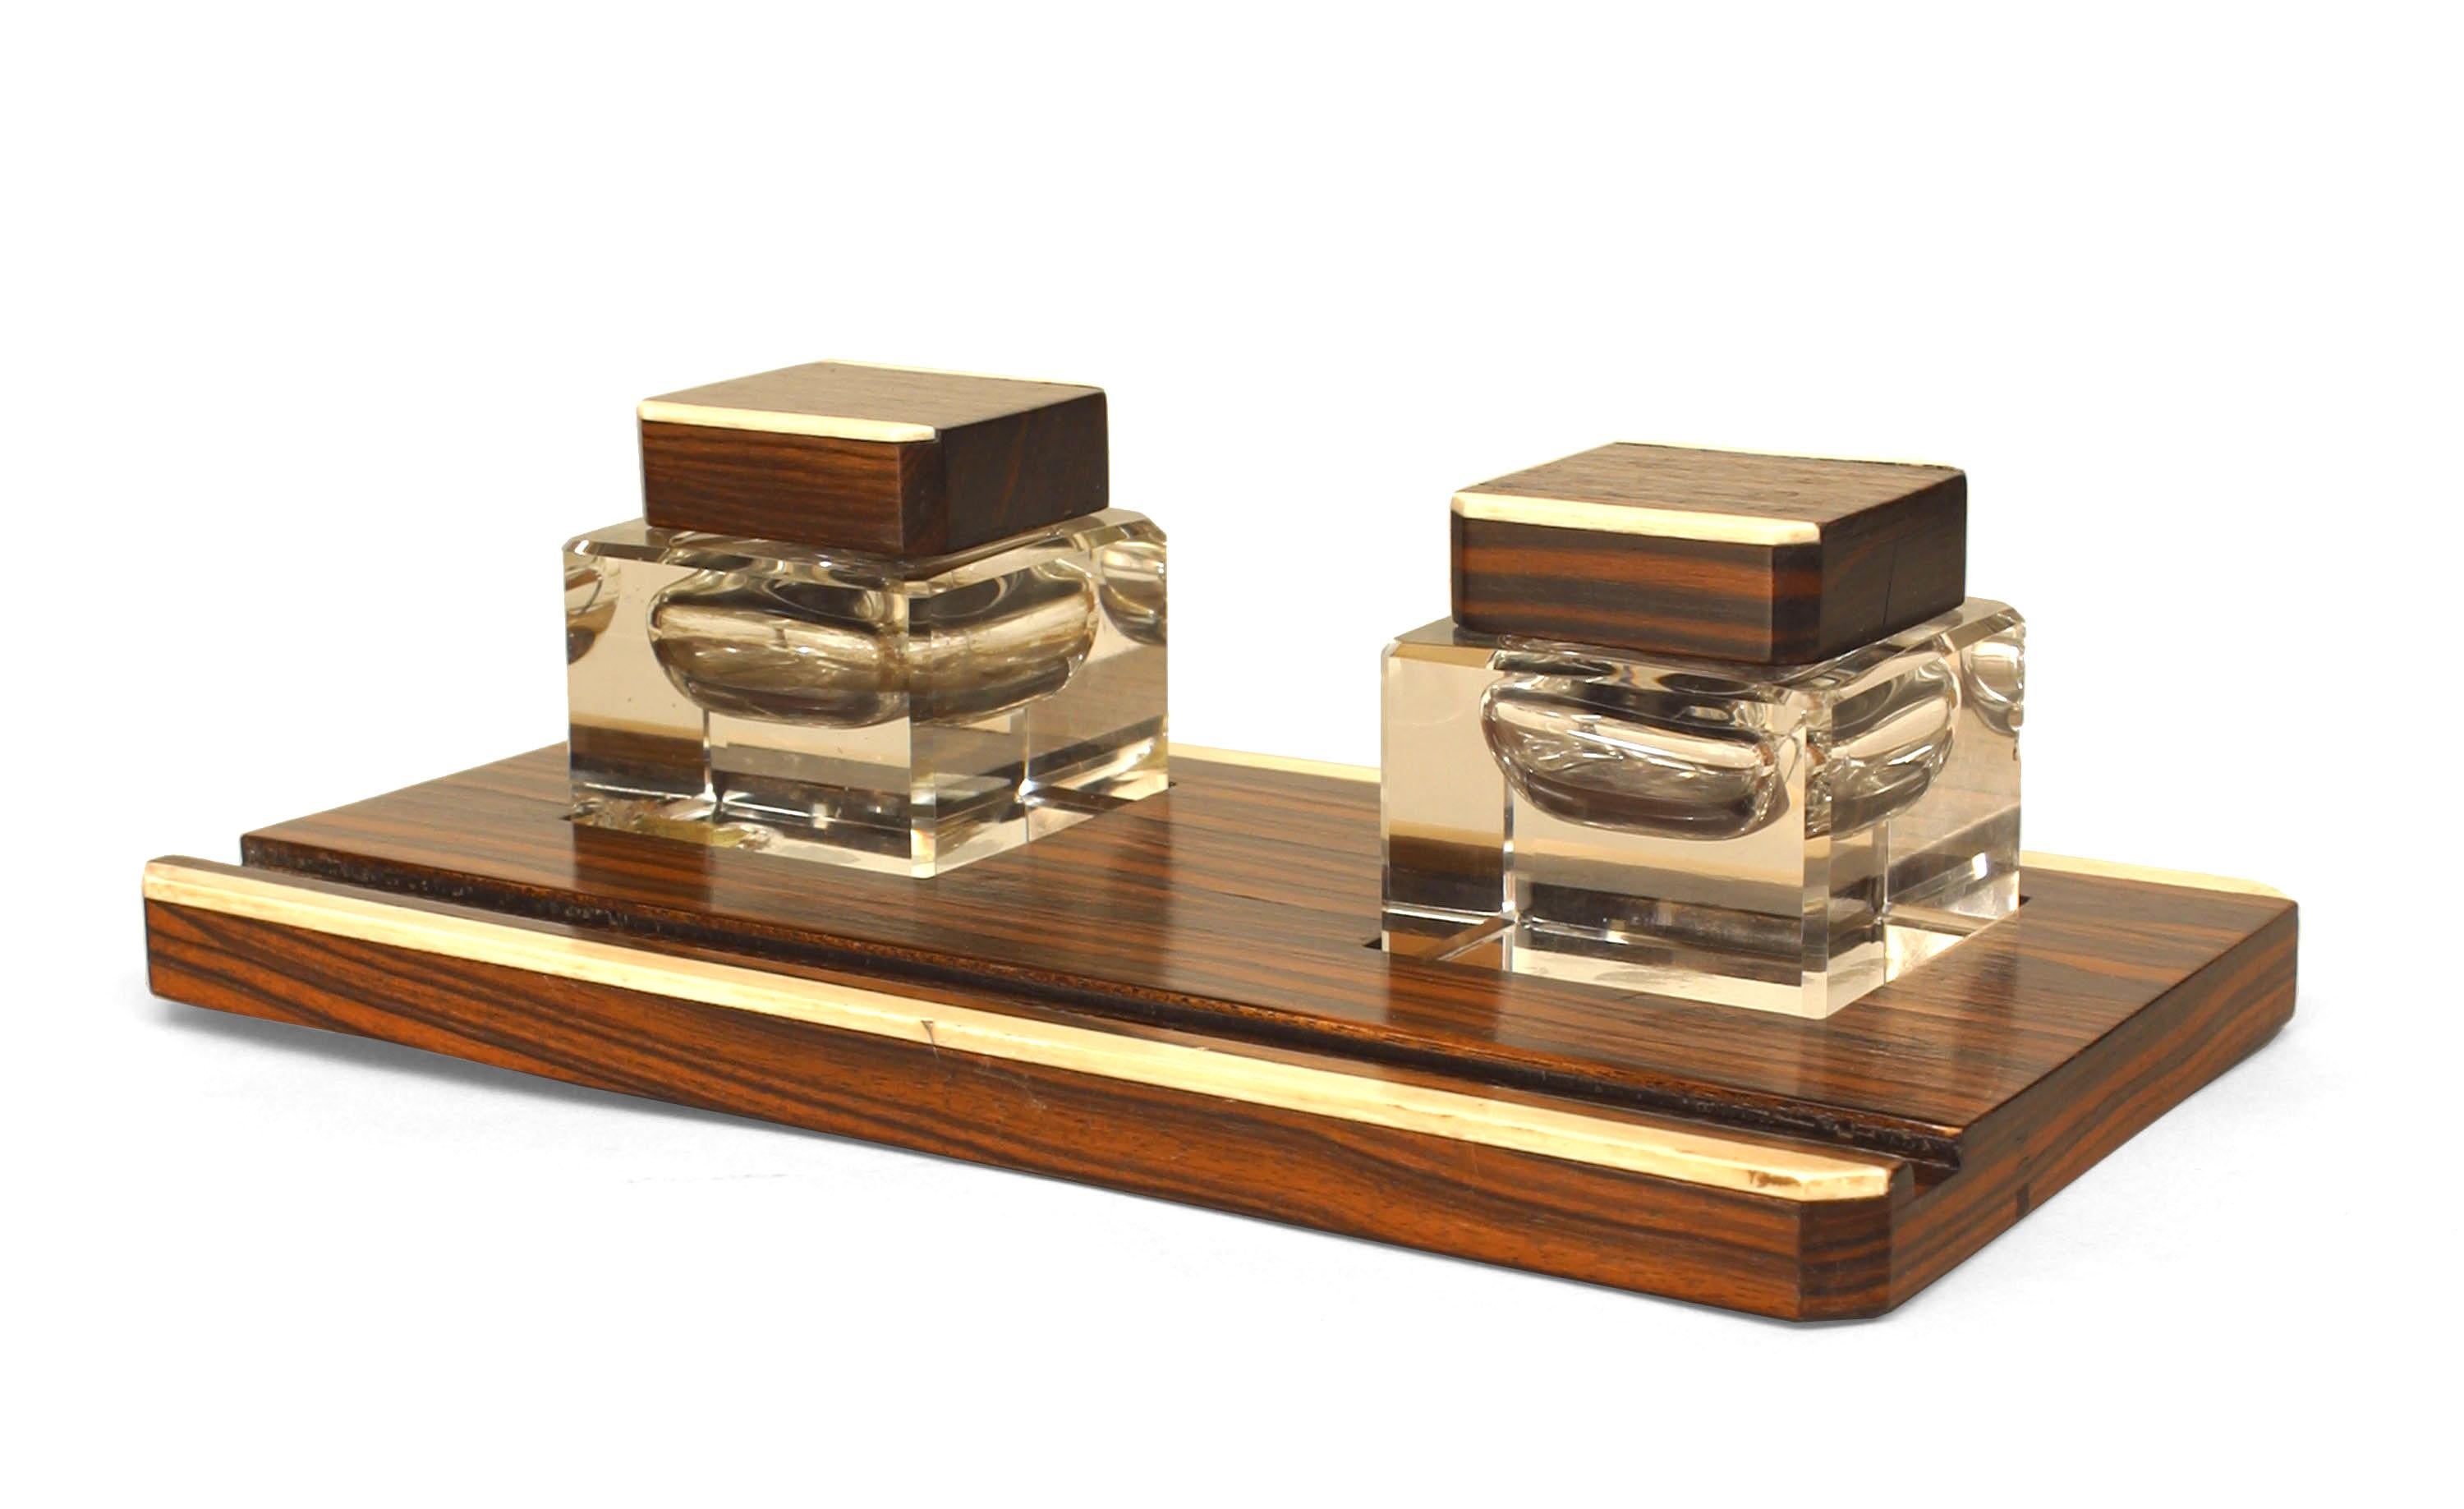 French Art Deco three piece desk set composed of bone-trimmed palisander wood. The set includes a double inkwell, blotter, and roll blotter.